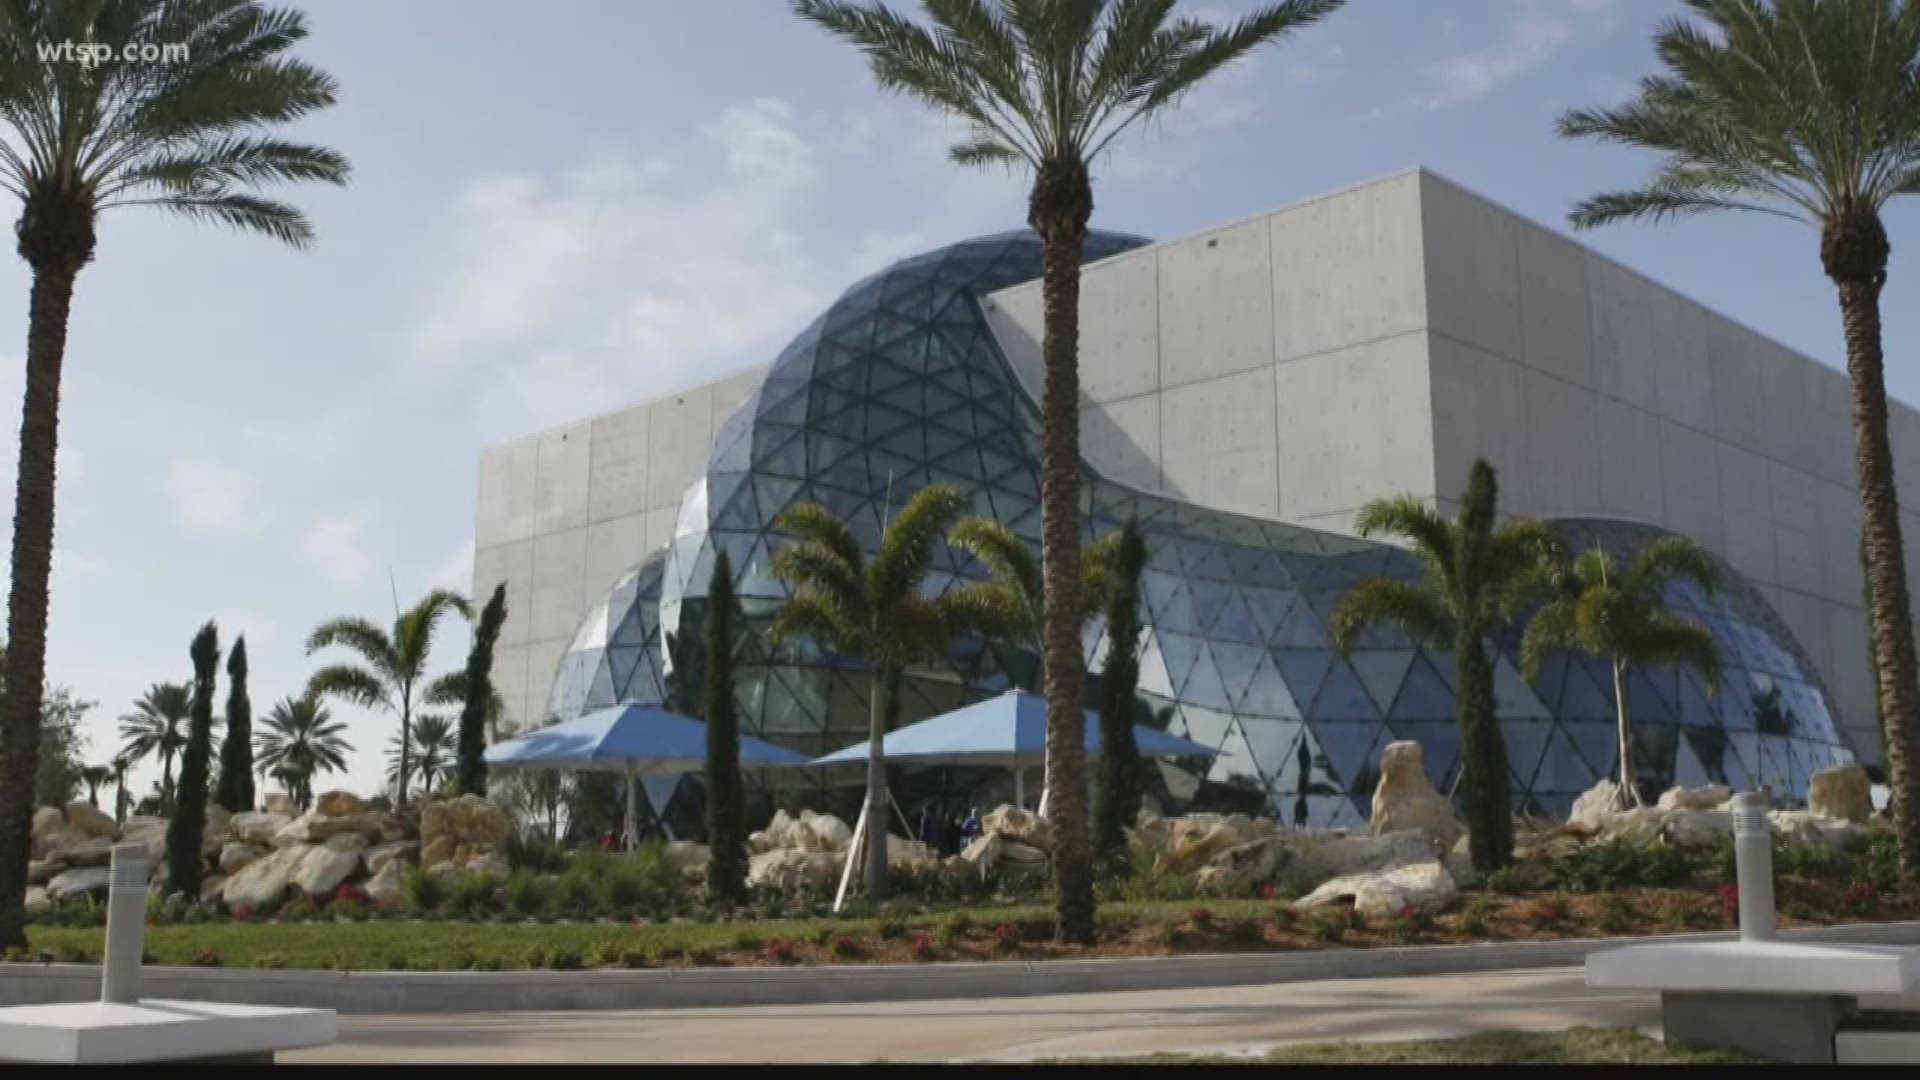 The museum is looking for $17.5 million for the project from Pinellas County.